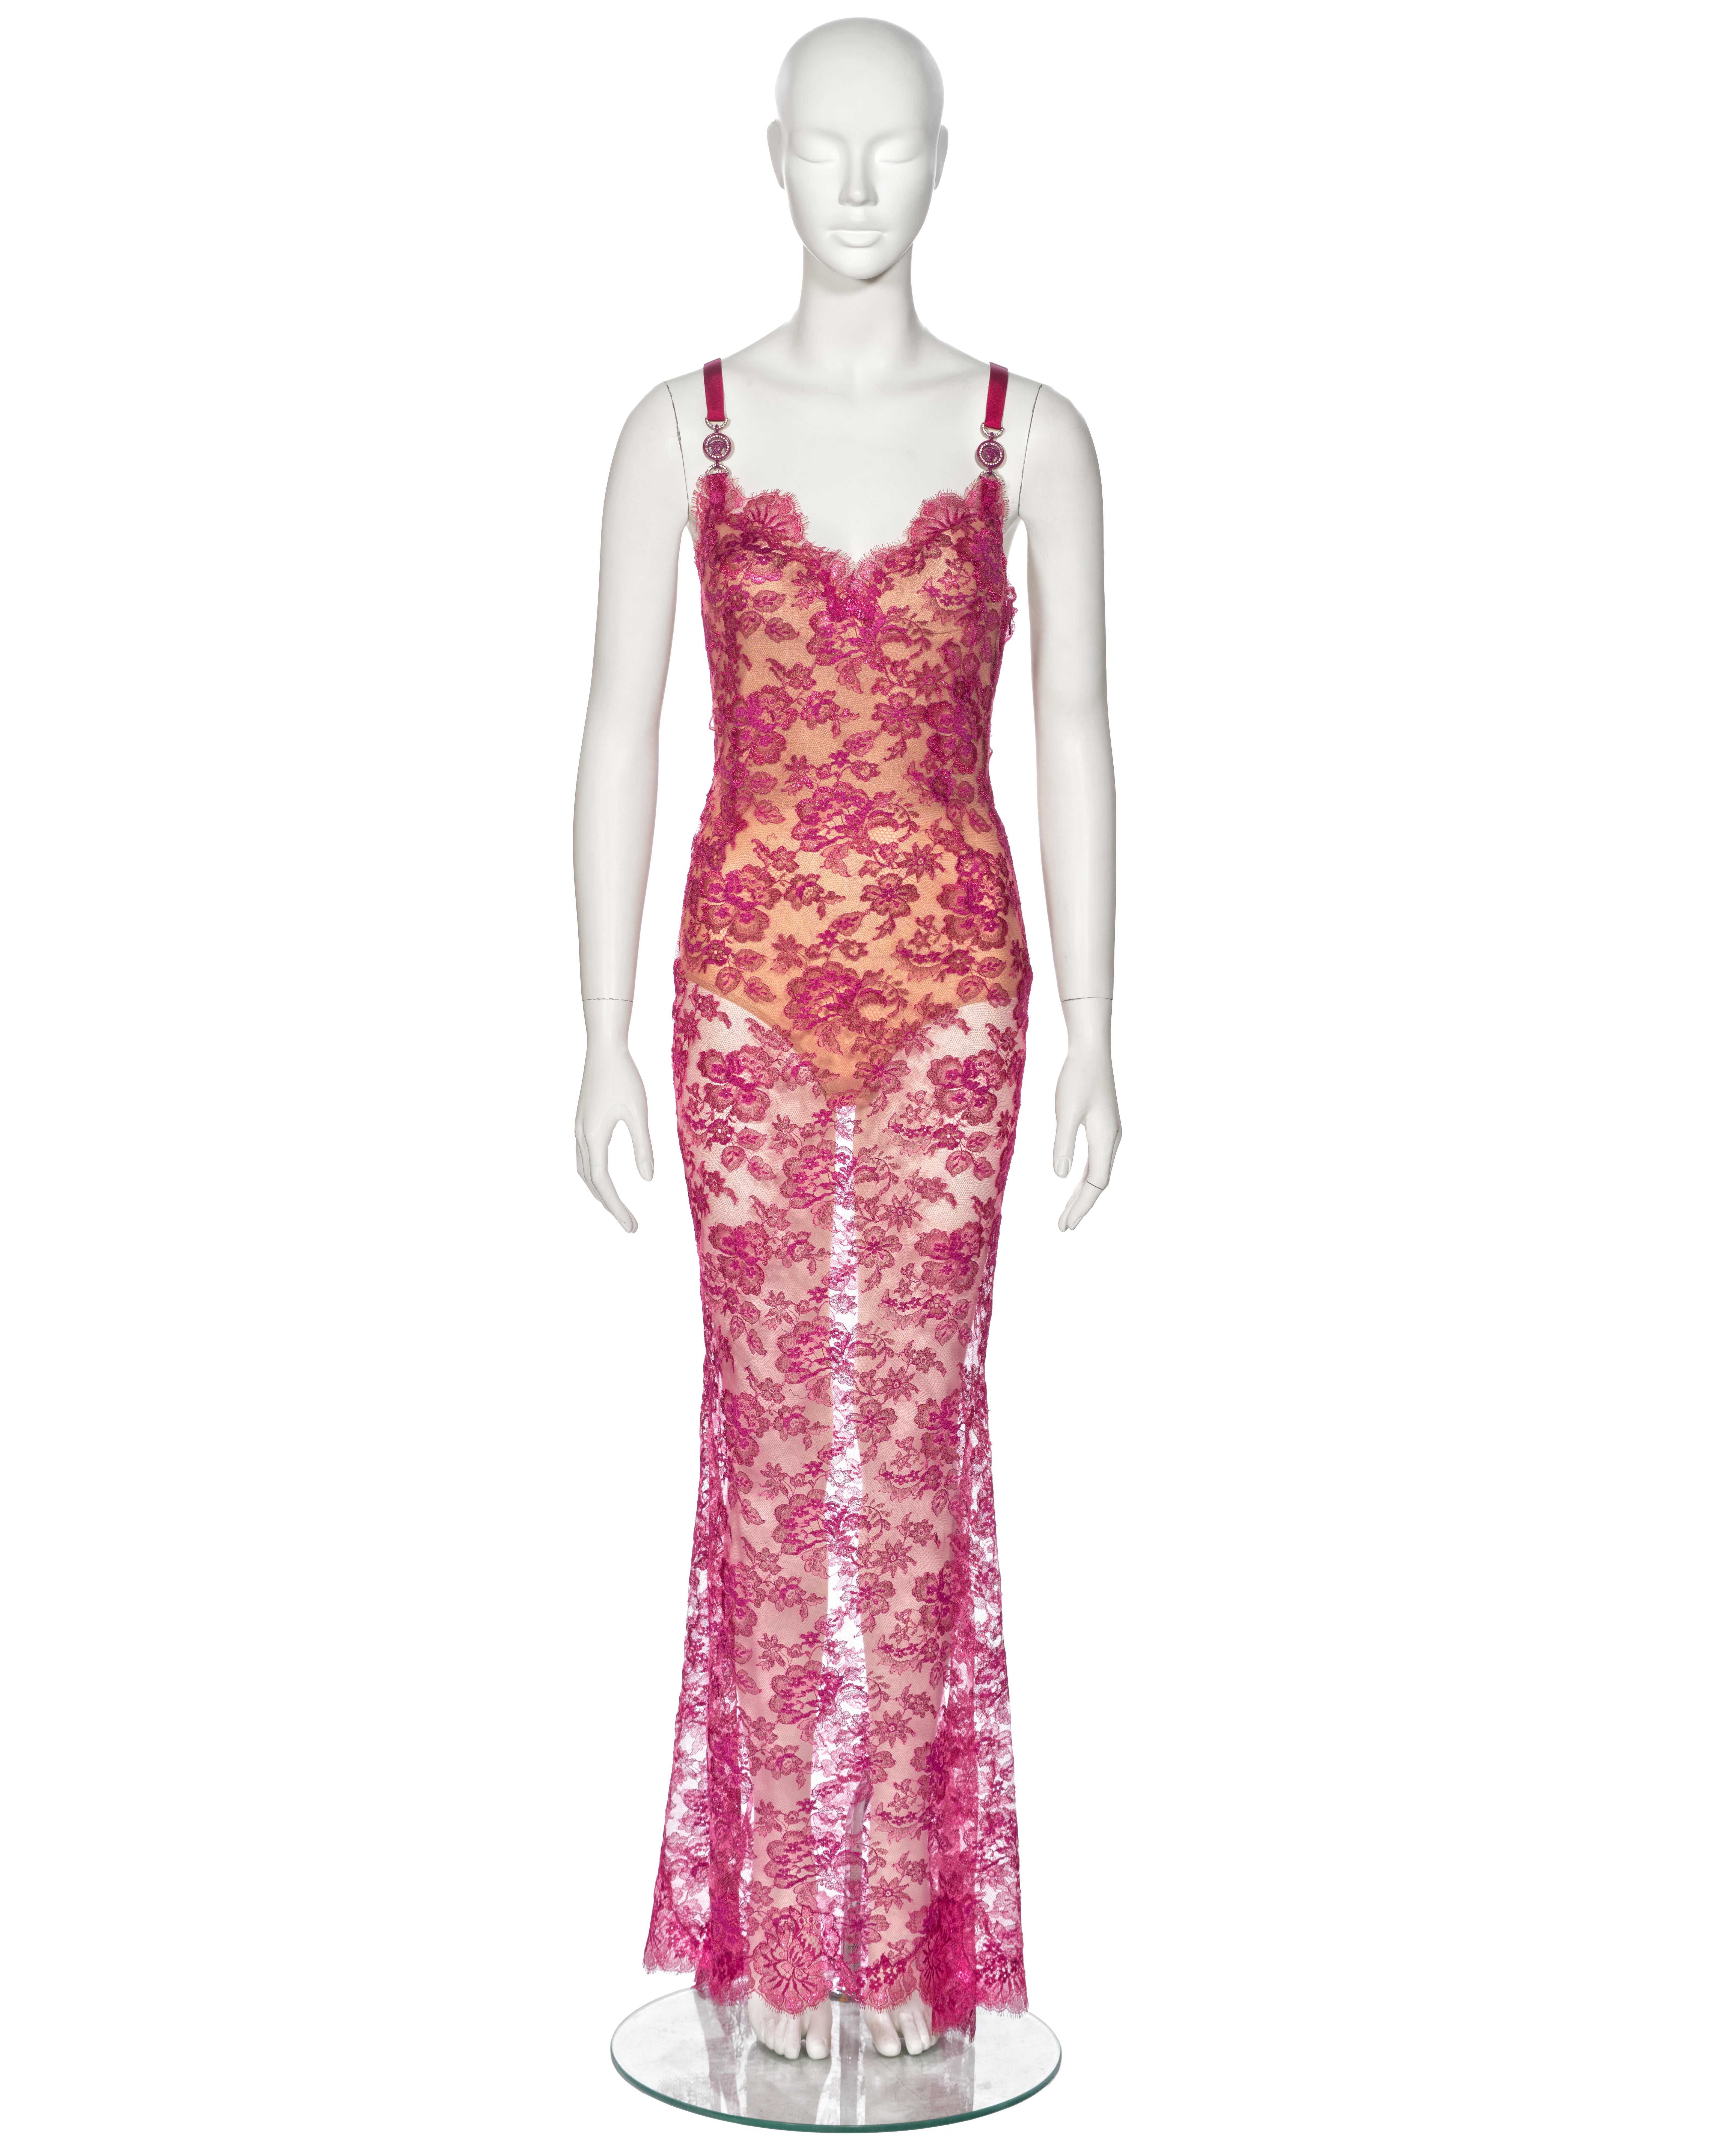 Atelier Versace Metallic Pink Couture Evening Dress and Bag, ss 1996 In Excellent Condition For Sale In London, GB